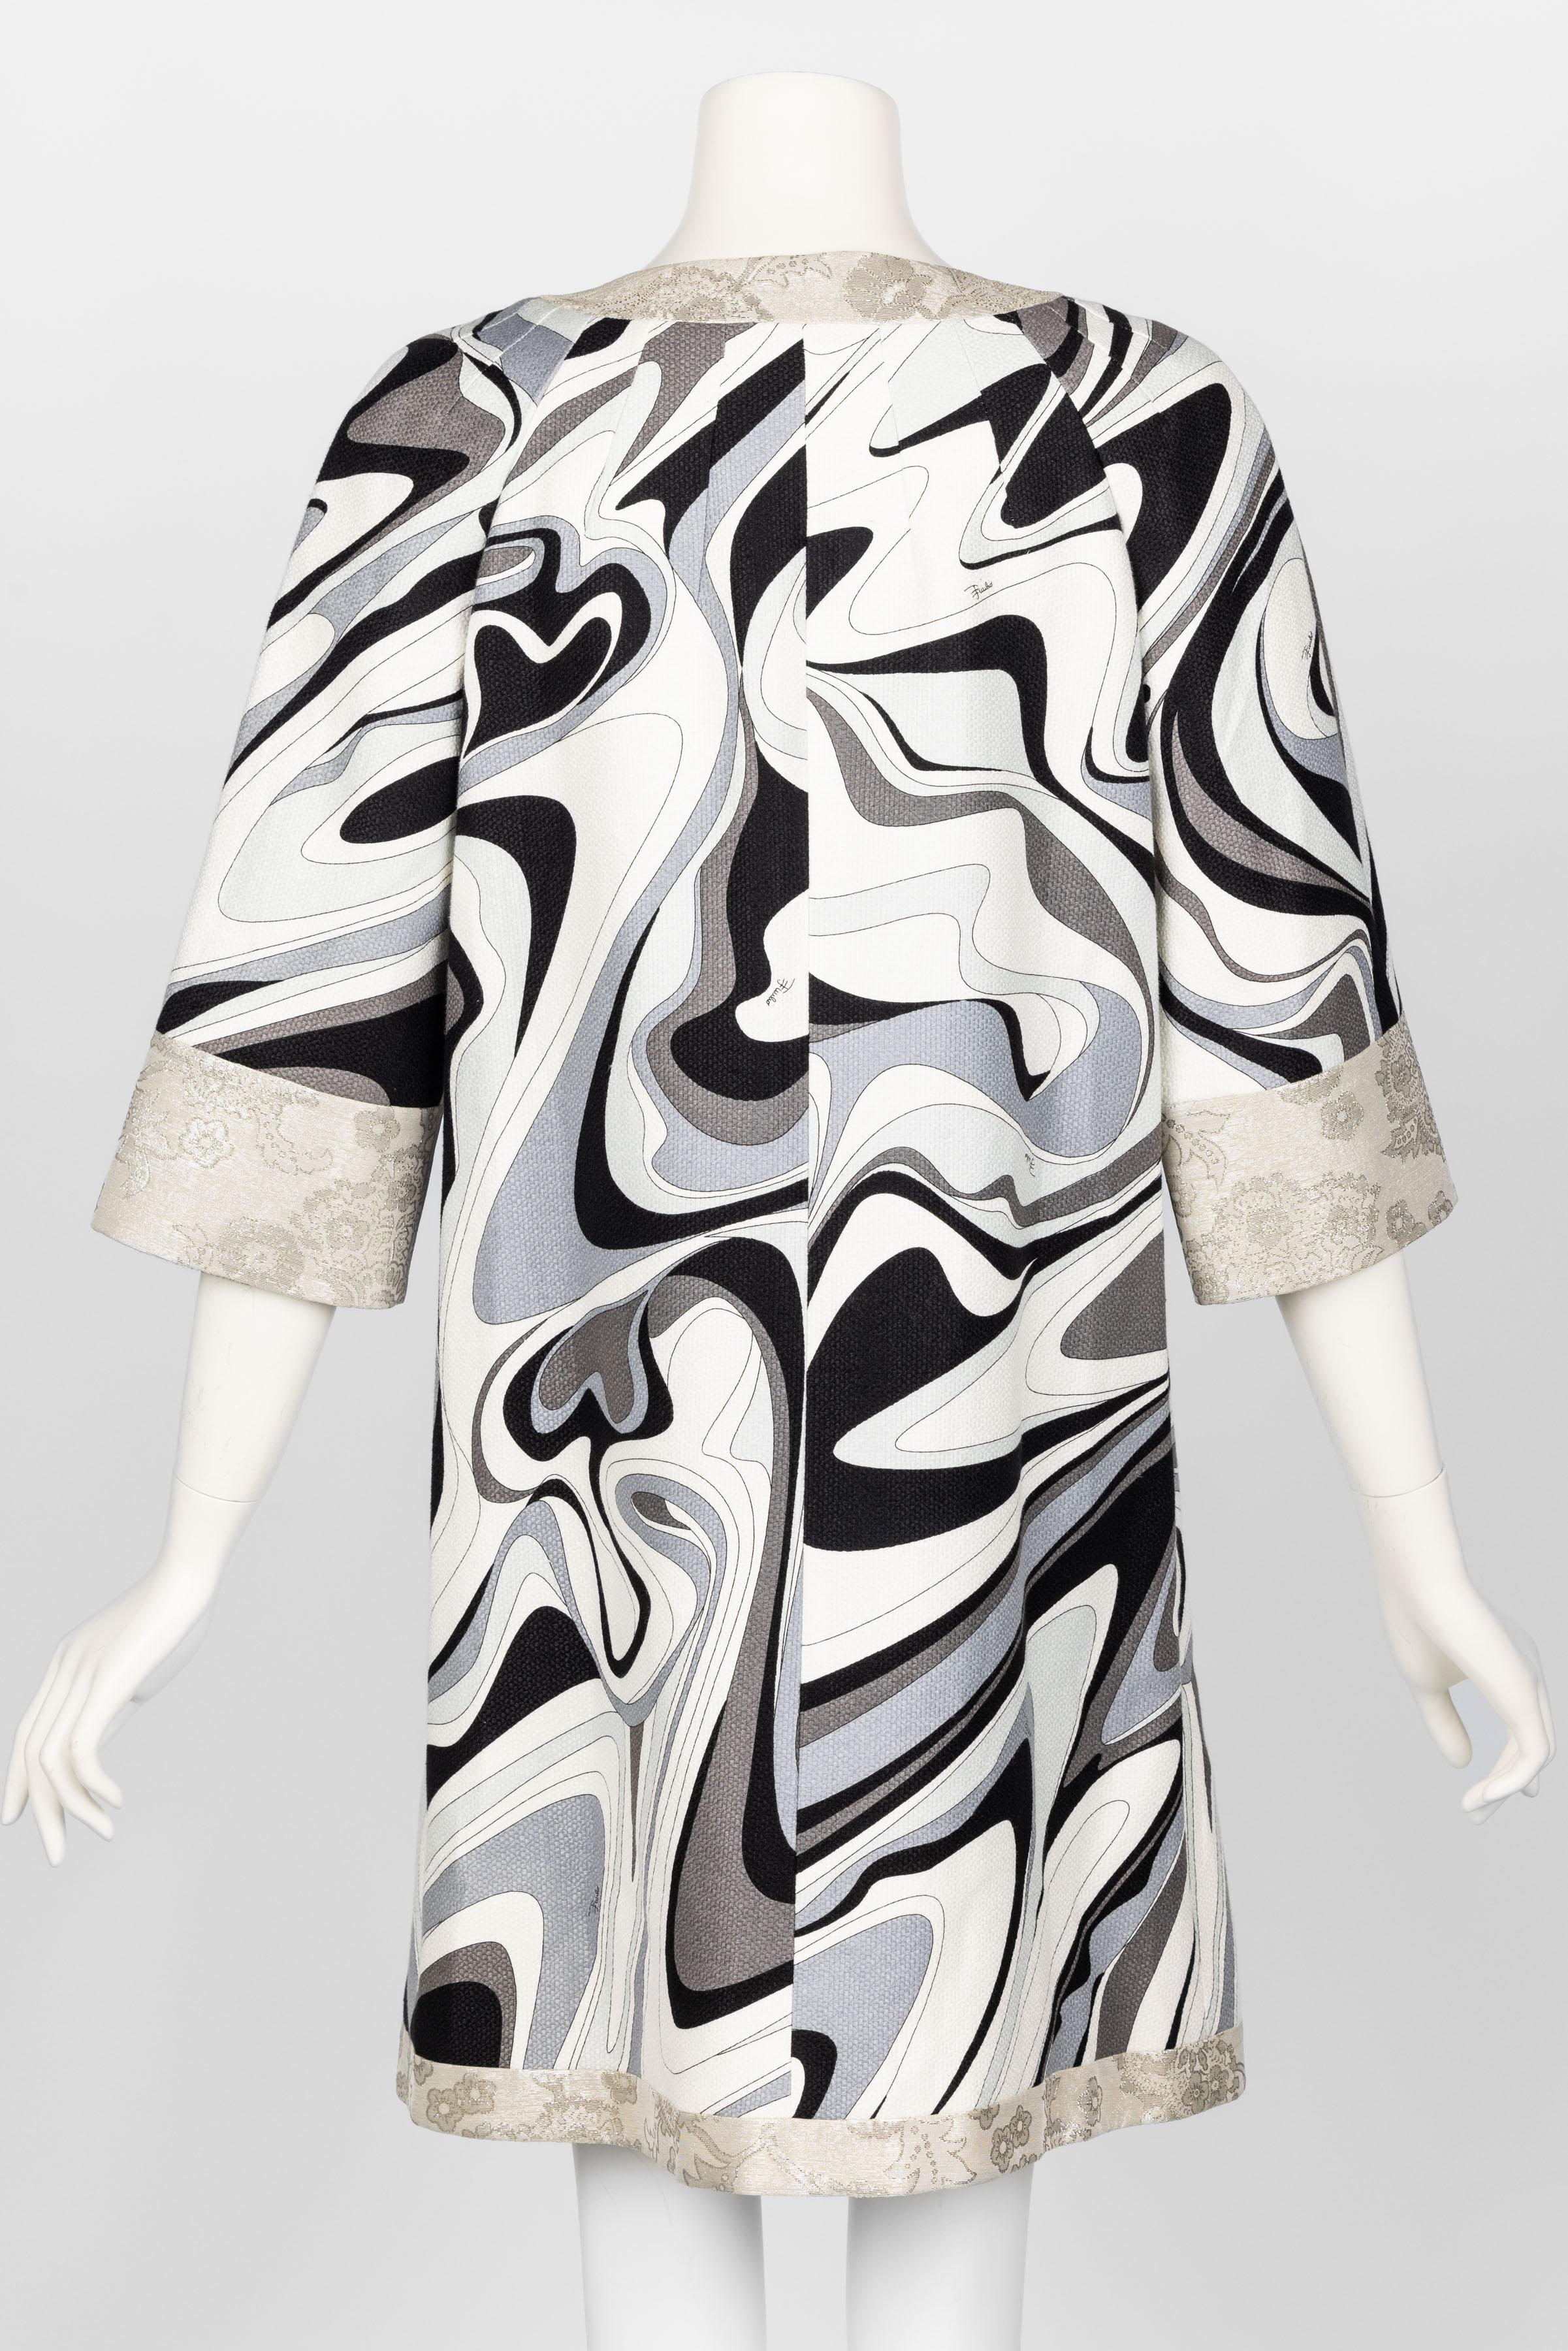 Emilio Pucci Silver Black Print Spring 2007 Runway Evening Coat For Sale 2